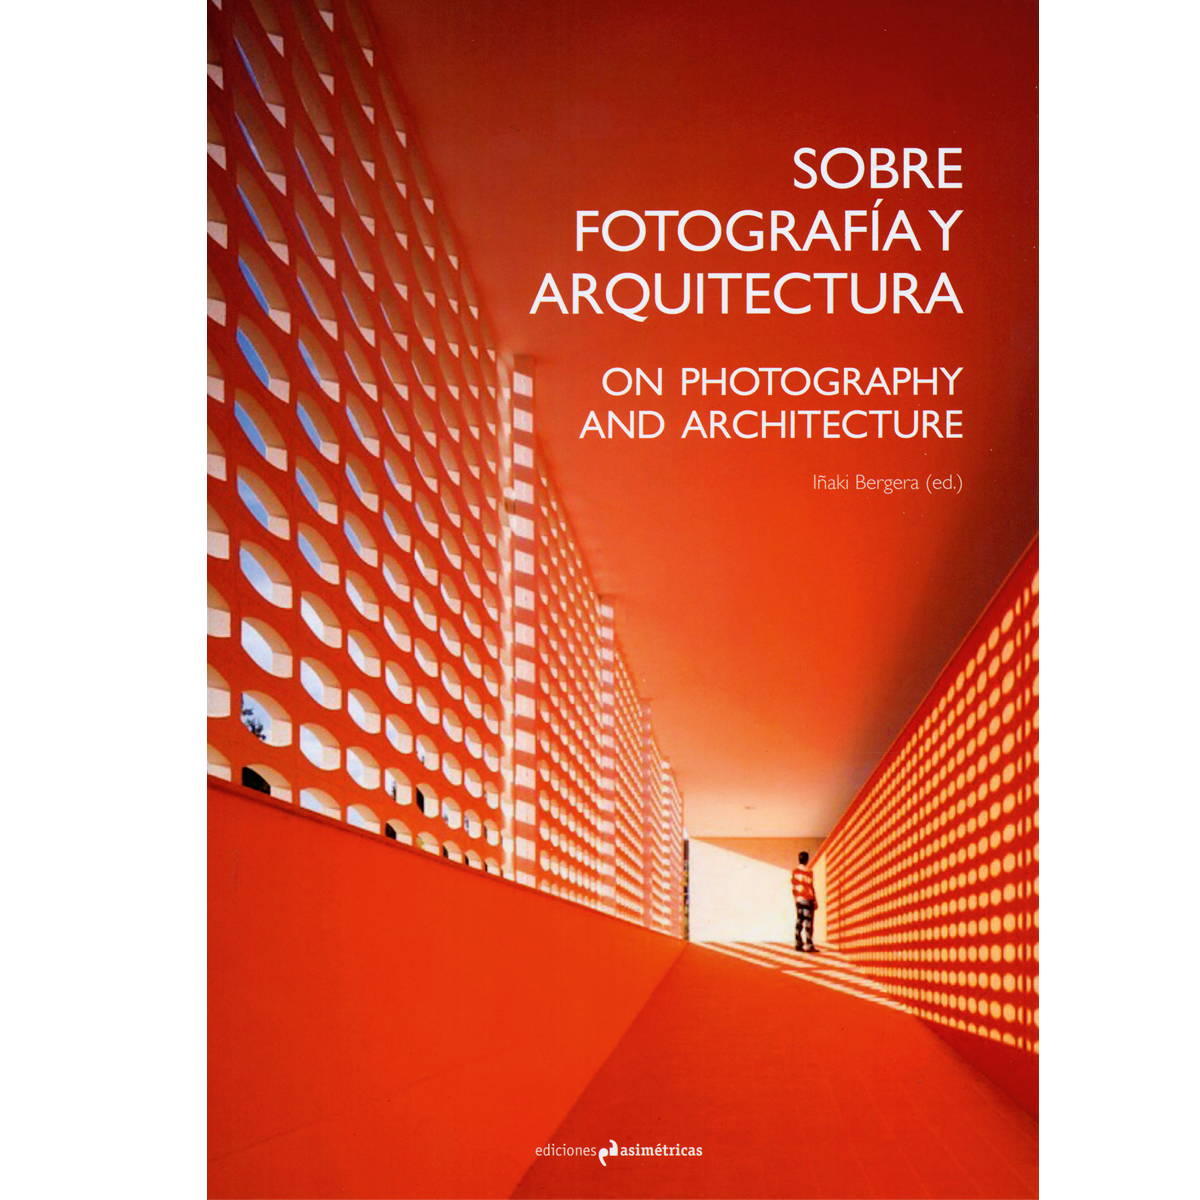 On Photography and Architecture